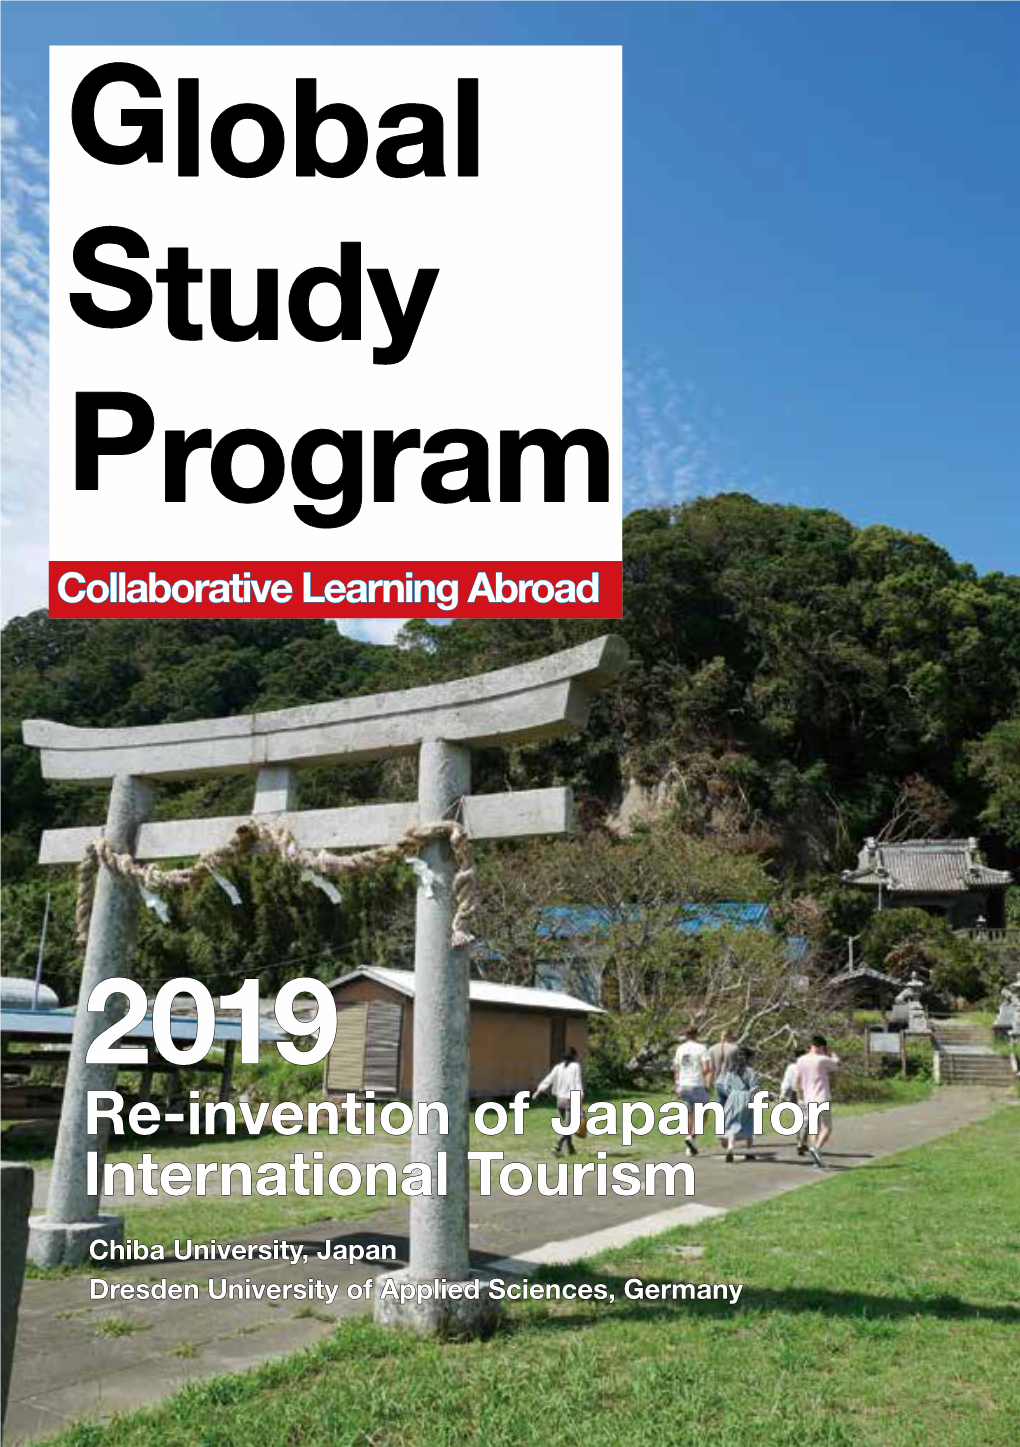 Global Study Program Collaborative Learning Abroad